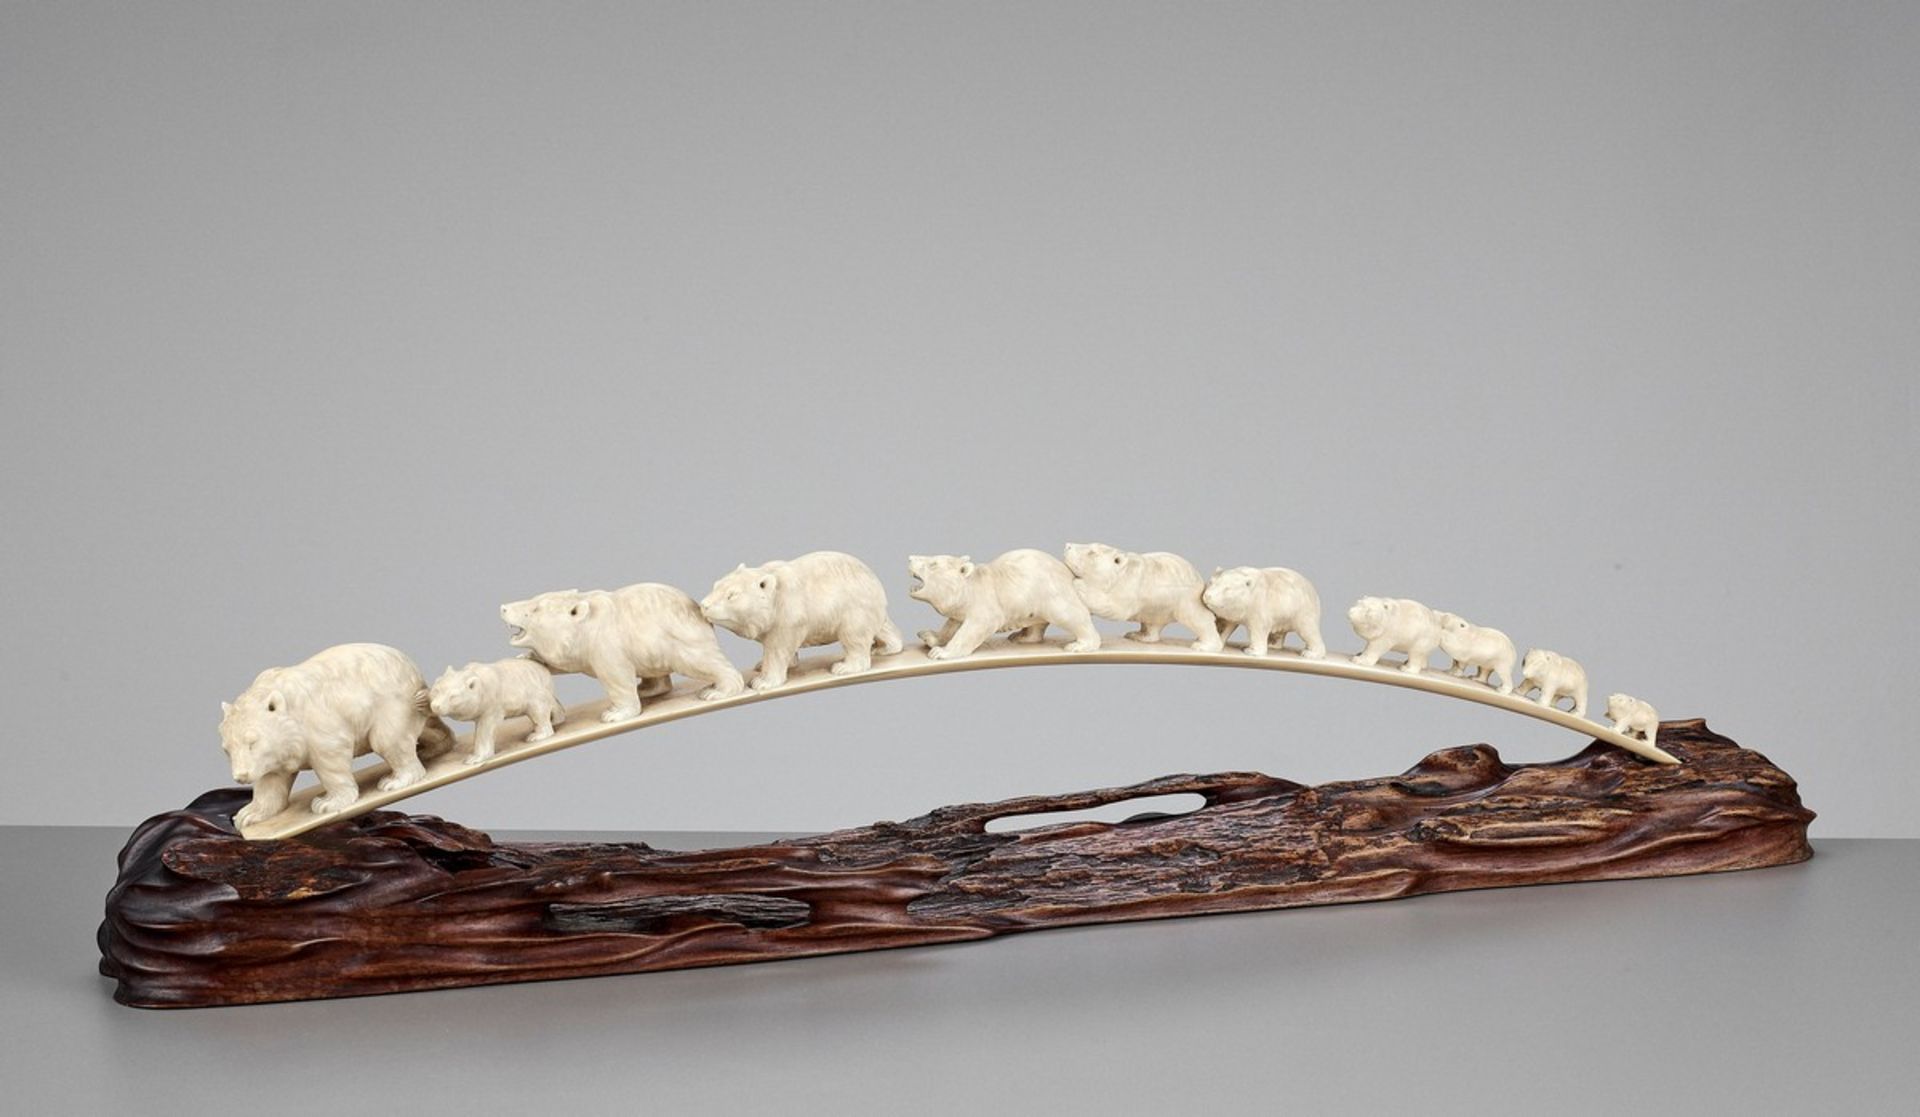 AN IVORY TUSK OKIMONO OF TRAVELING BEARS Japan, Meiji period (1868-1912)Finely carved with a group